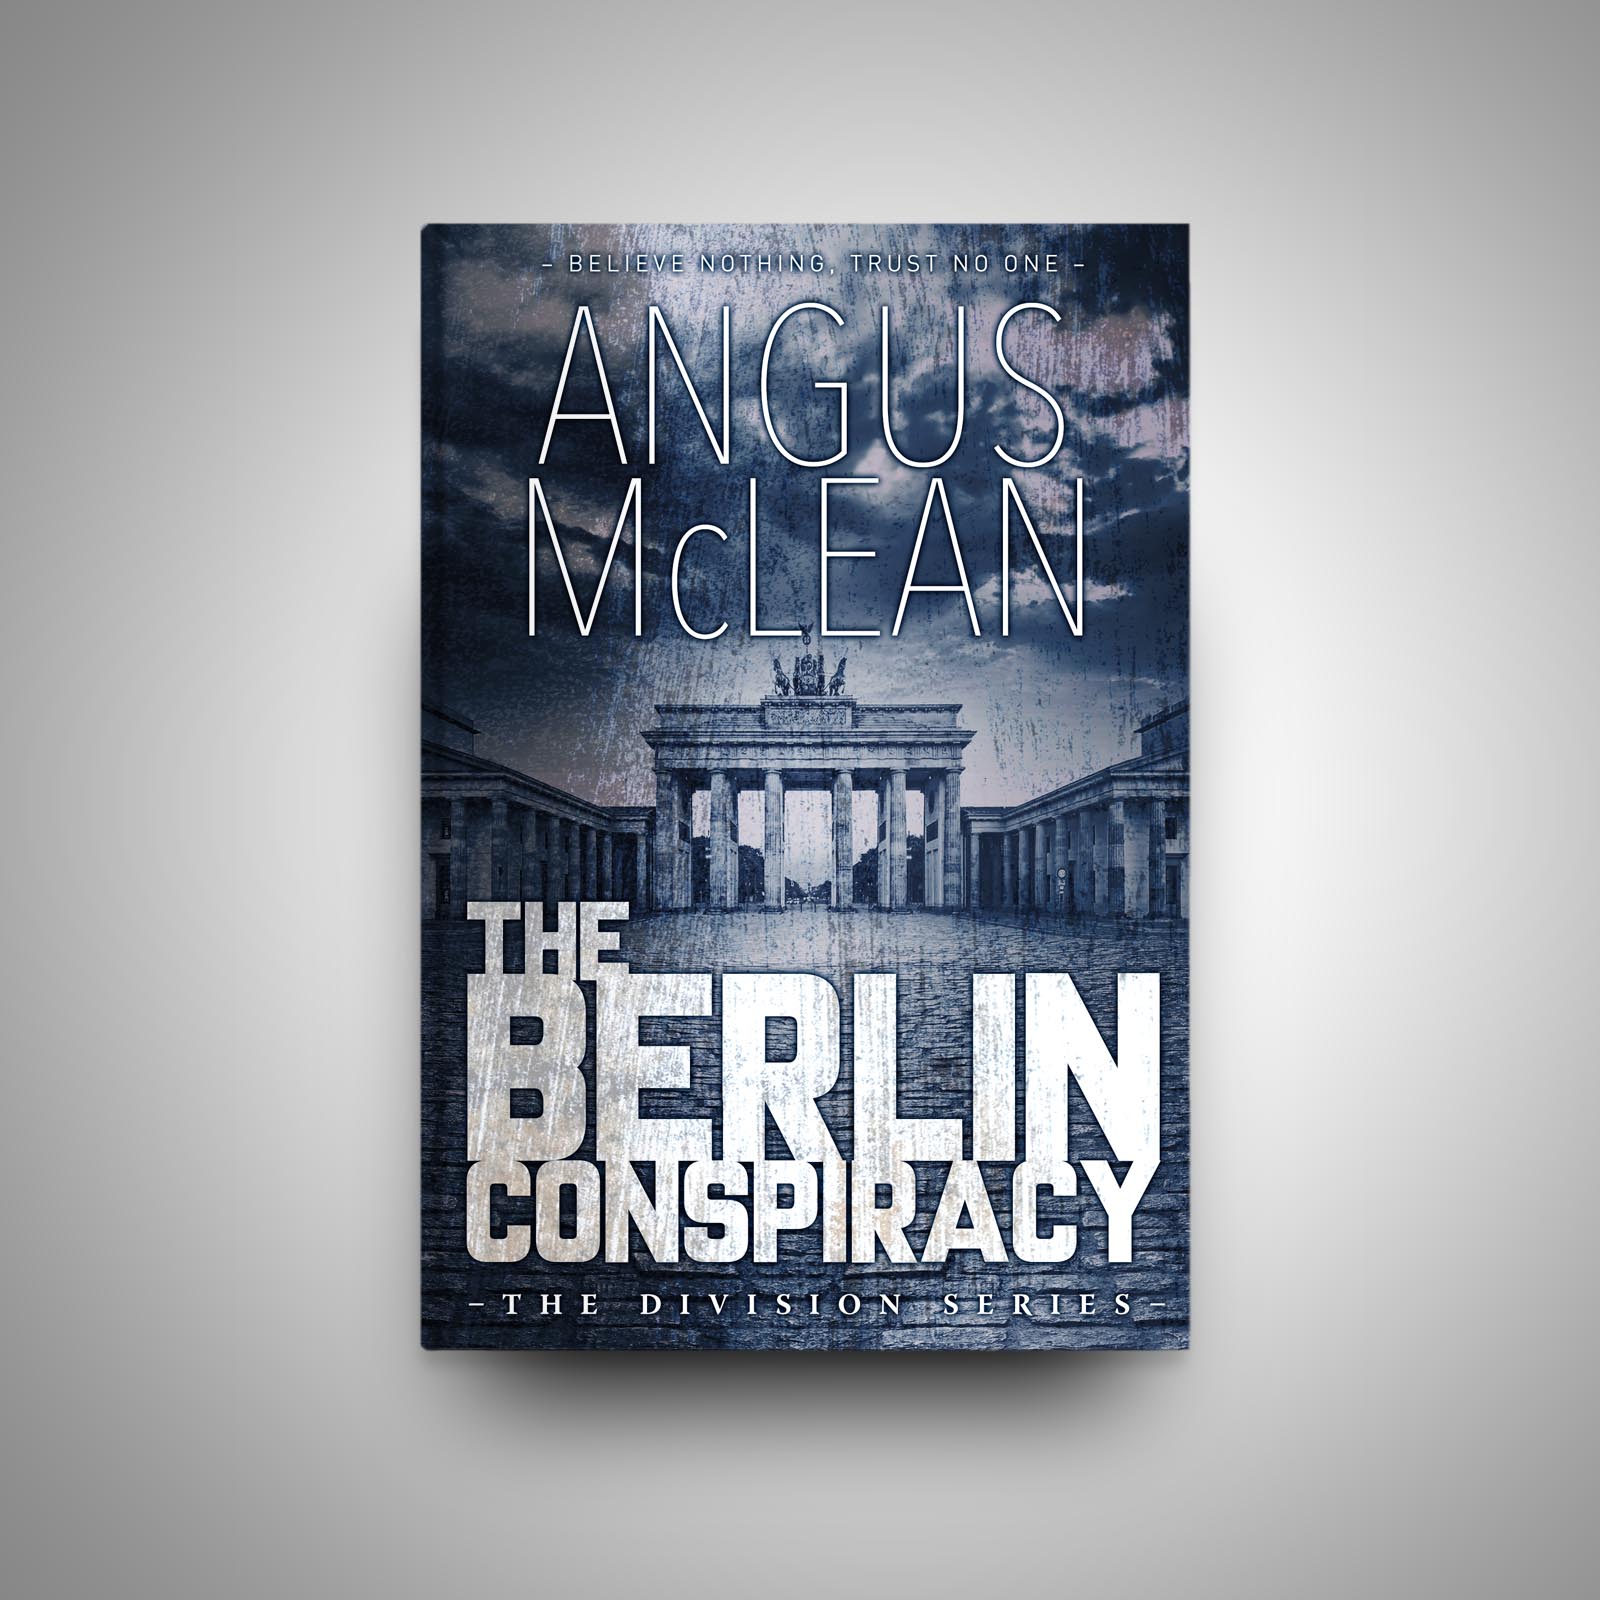 Angus McLean ebook download kindle The Division The Berlin Conspiracy